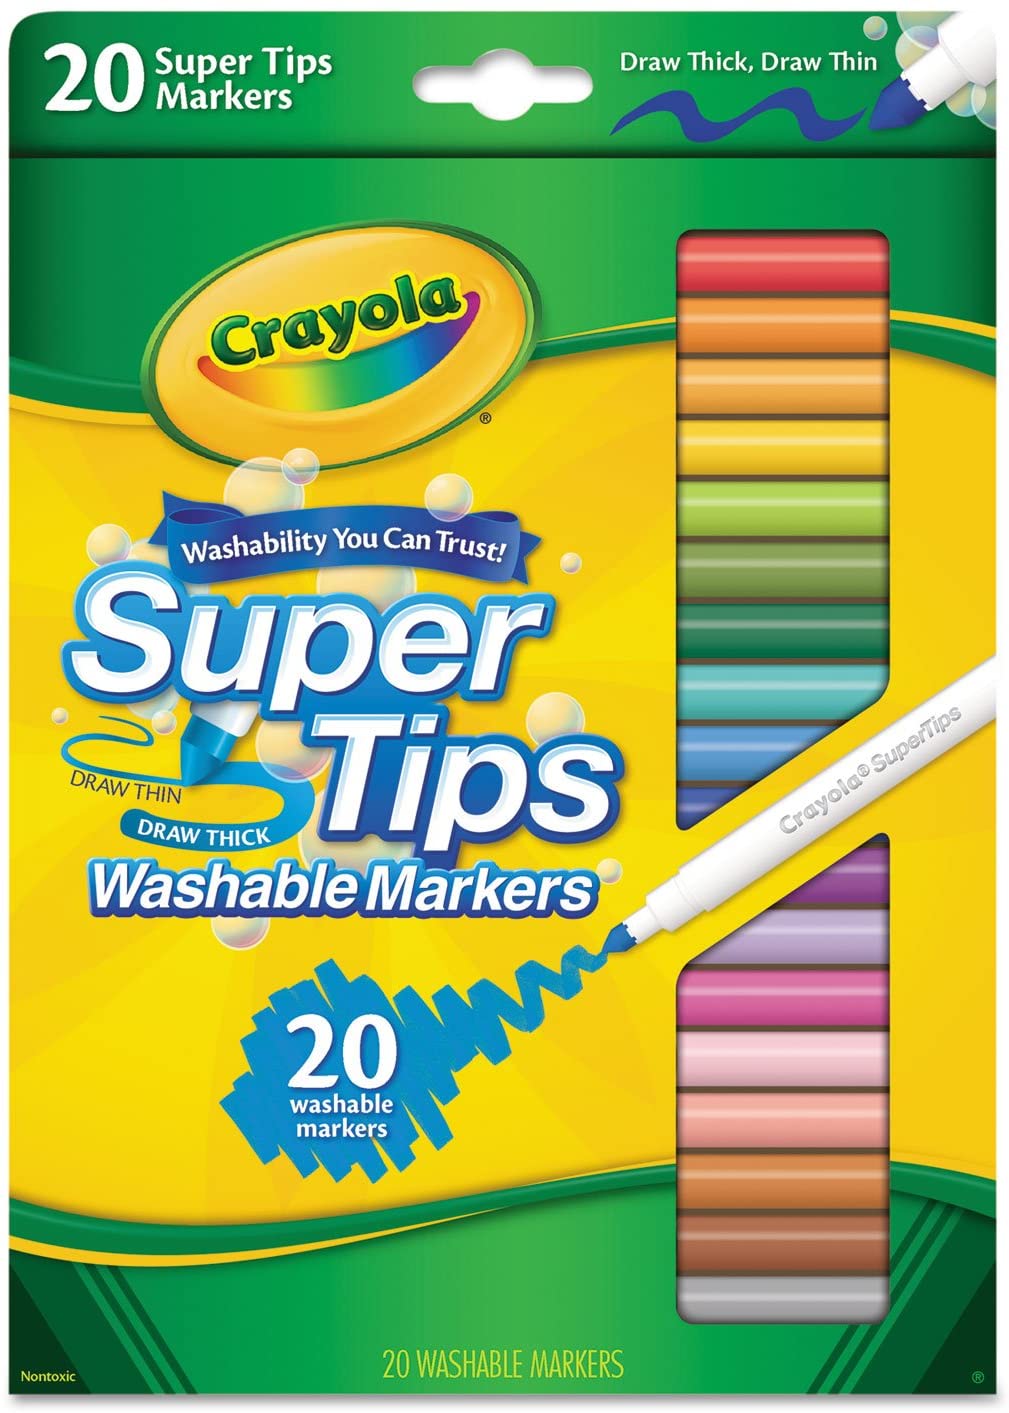 Crayola - Crayola Supertips Washable Markers 20 Count  Winn-Dixie delivery  - available in as little as two hours